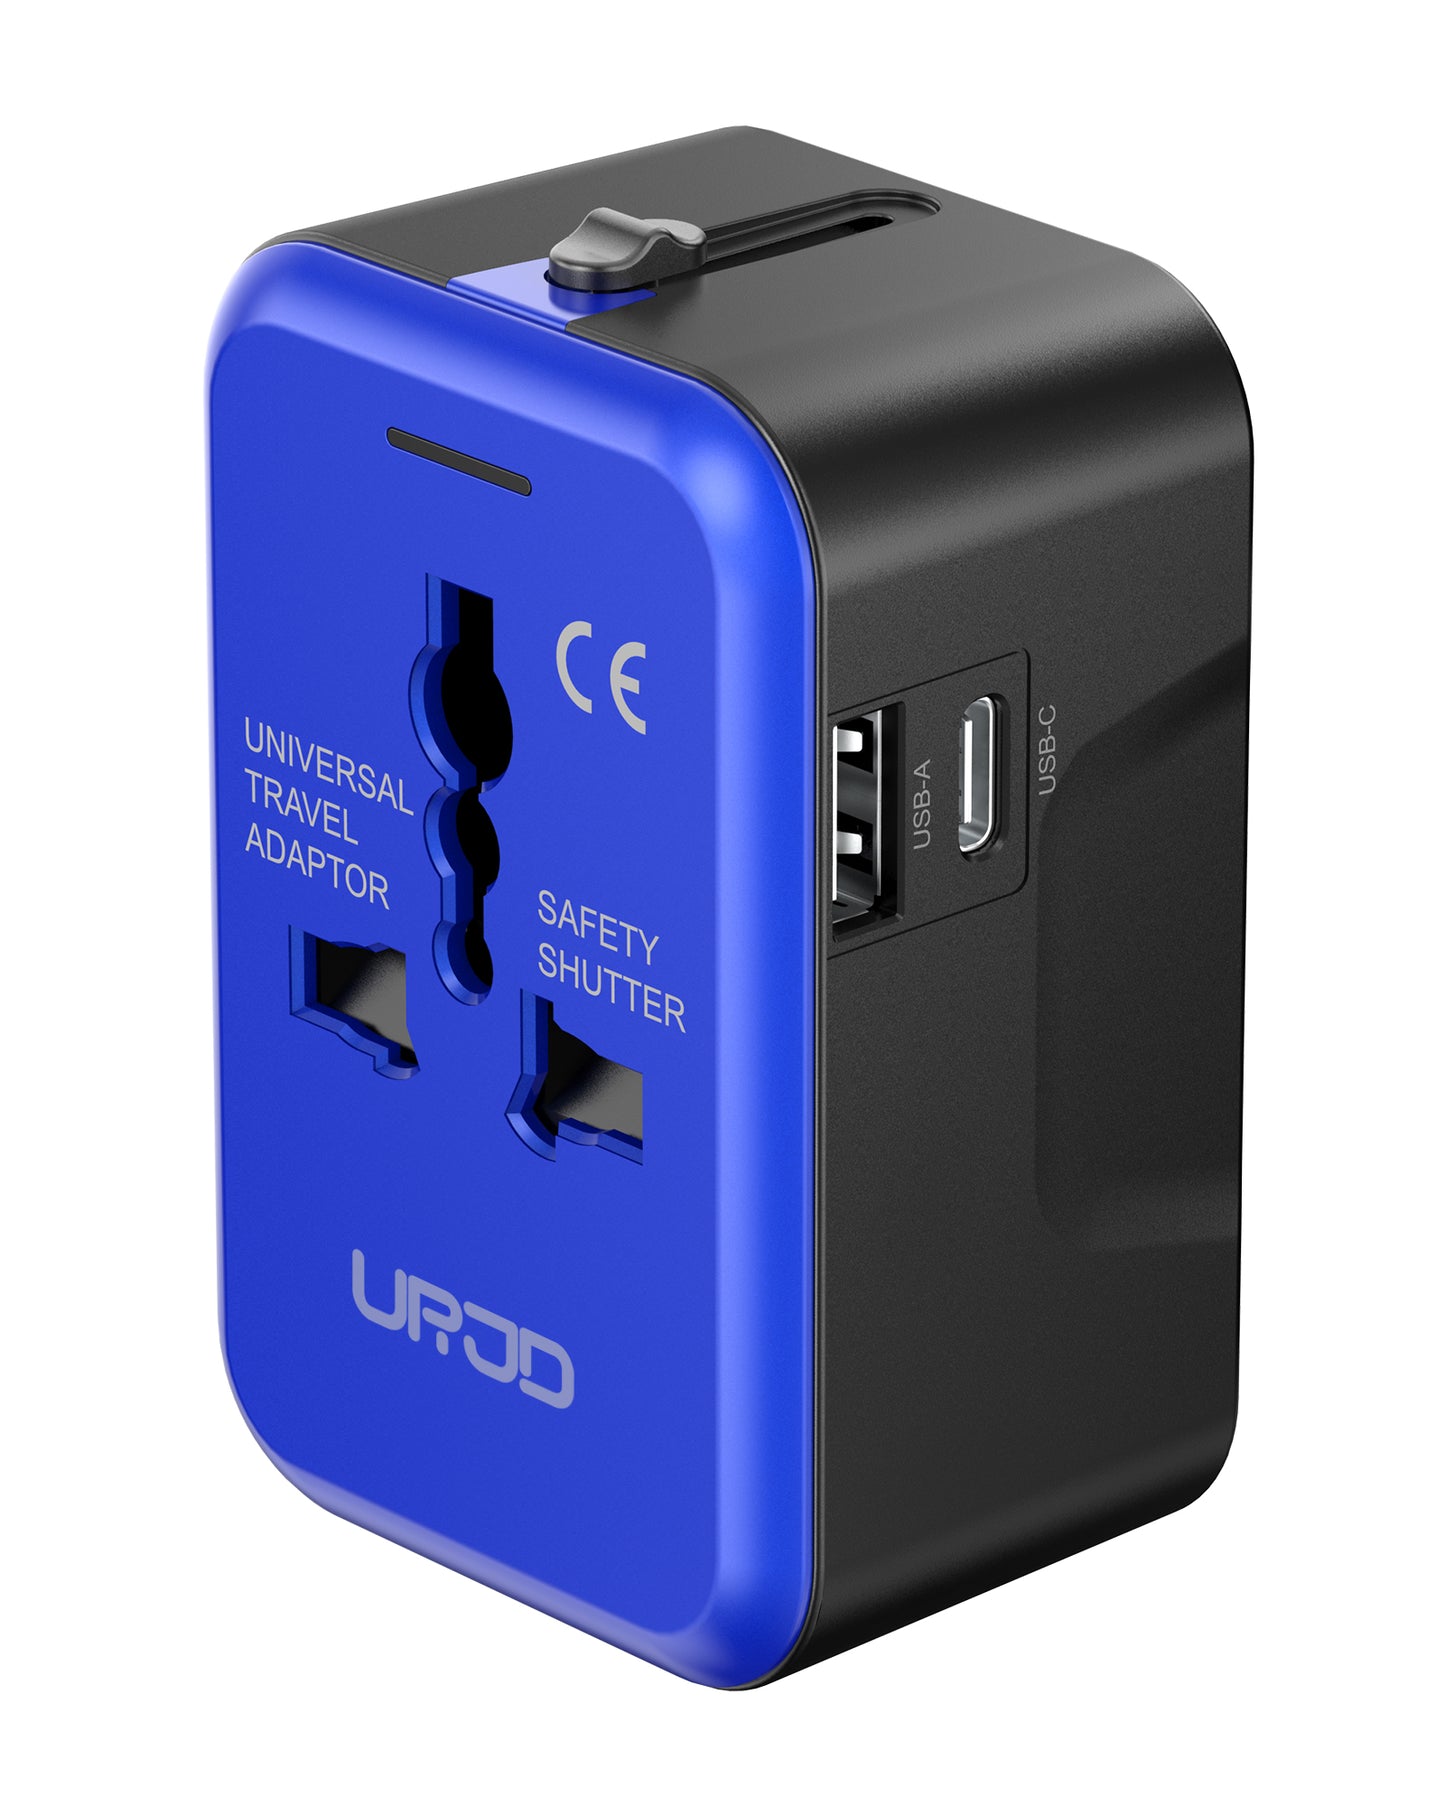 Universal Travel Adapter with (Type C+USB) 2 USB Ports & AC Outlet, International Plug Adapter Converter, Type C/A/G/I All in One Wall Charger Worldwide Travel Adaptor for US to EU UK AUS Asia